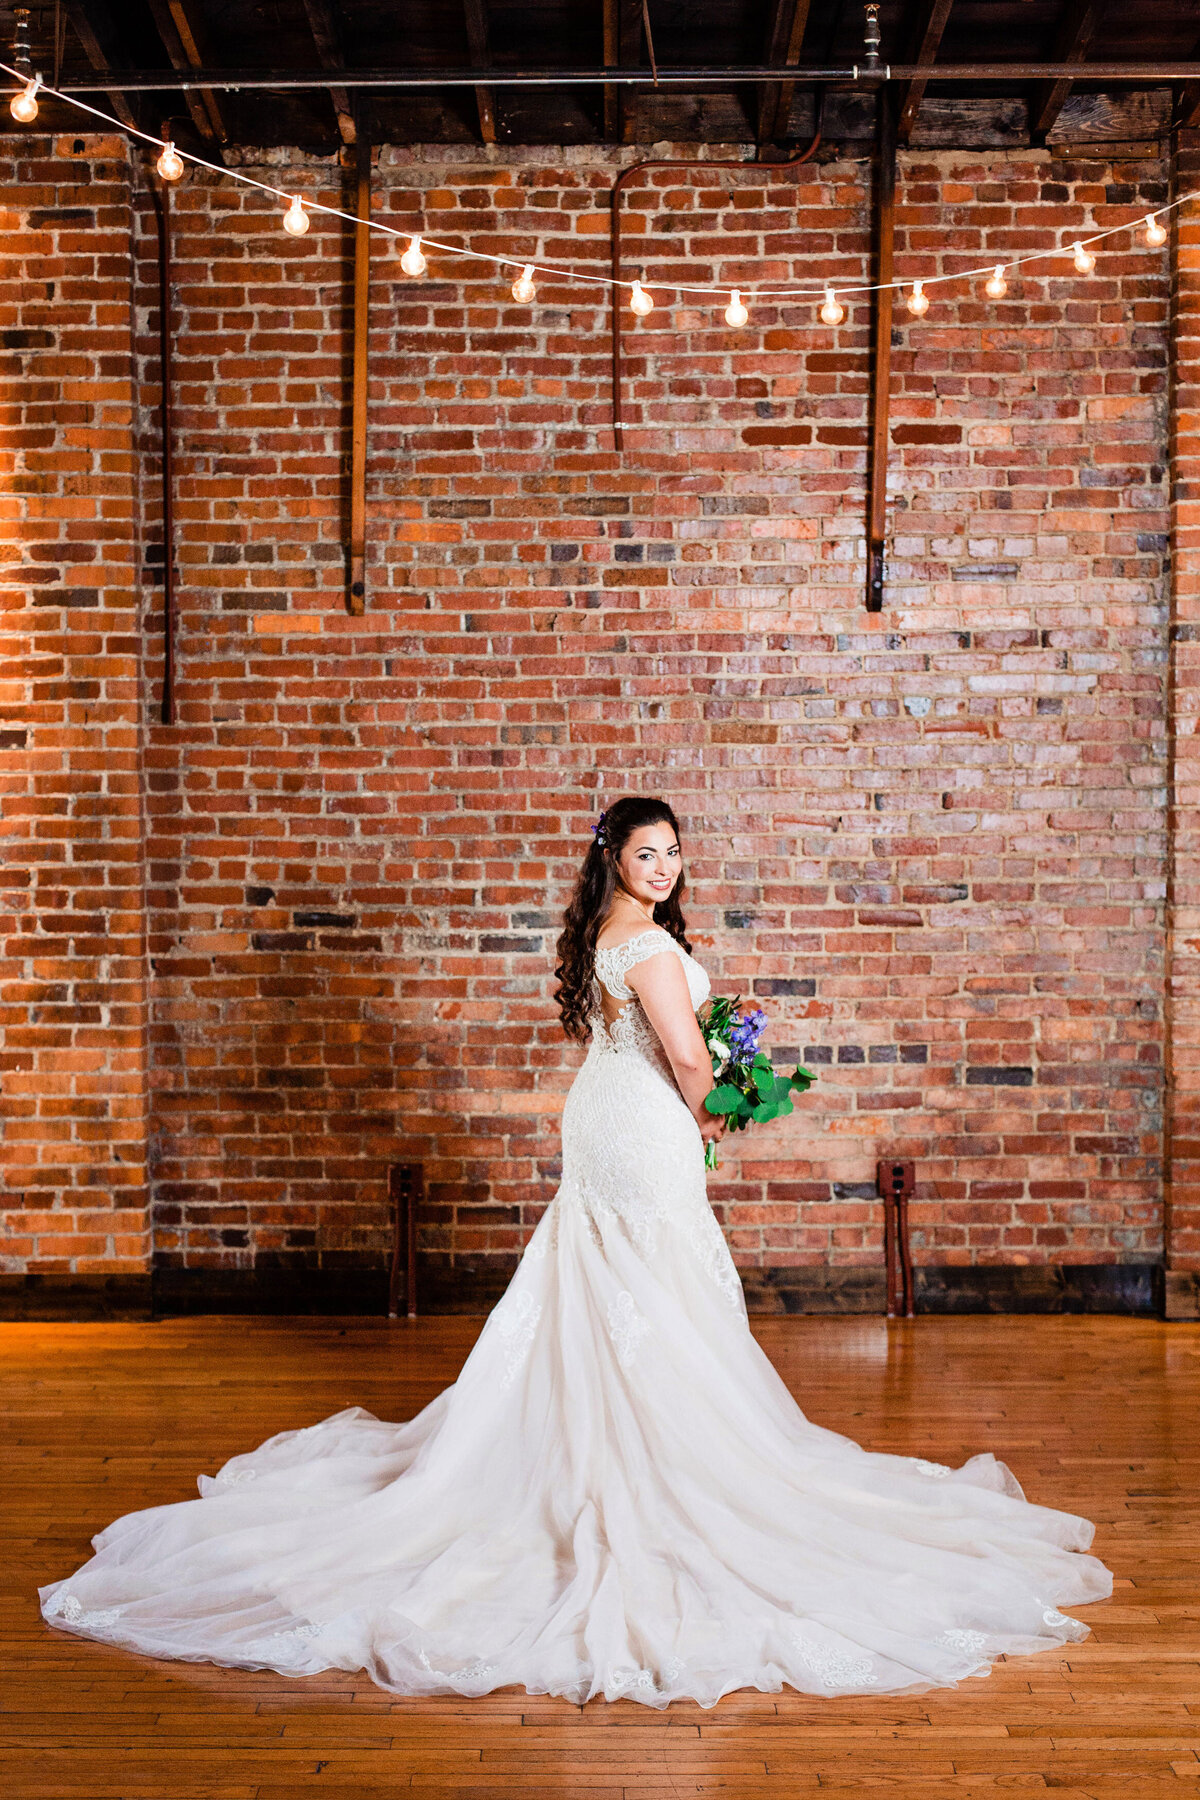 Brides train fanned out and she's looking over her shoulder smiling at the camera, brick wall behind her